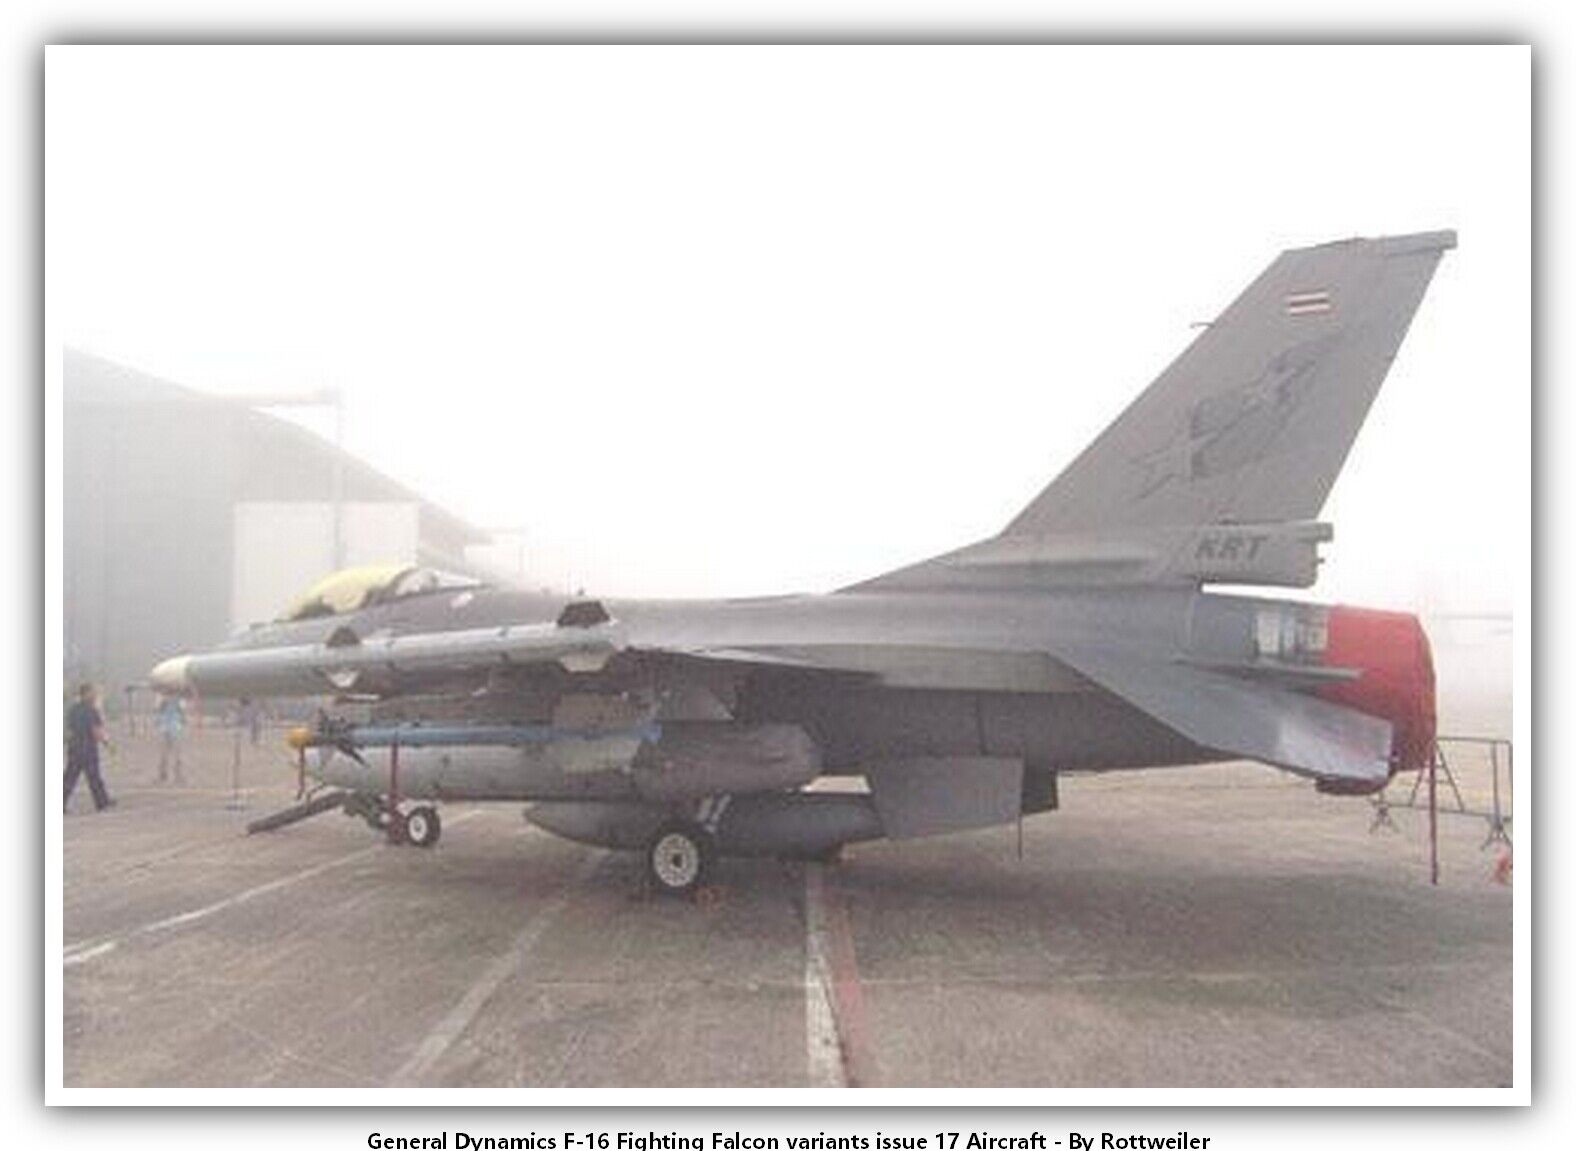 General Dynamics F-16 Fighting Falcon variants issue 17 Aircraft